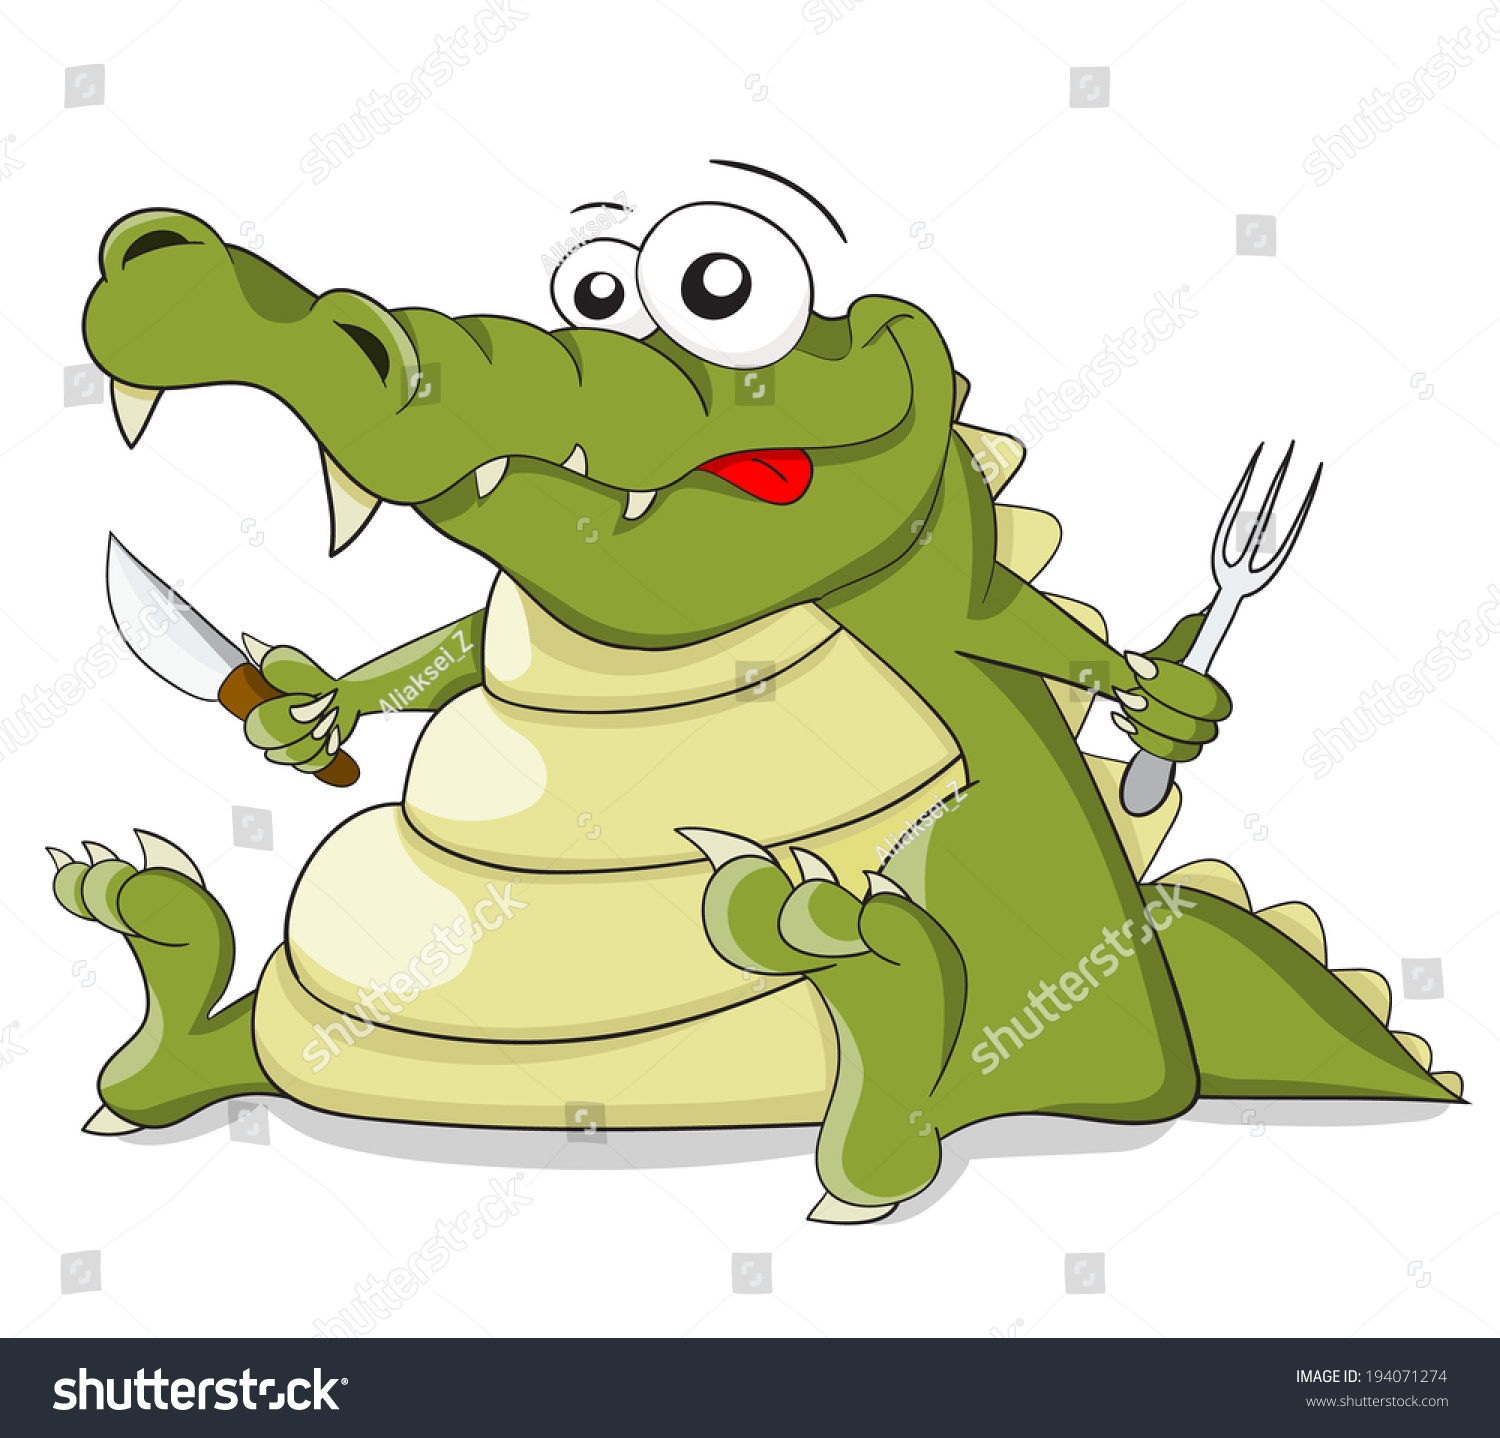 330 Alligator Cartoon Eating Images Stock Photos And Vectors Shutterstock